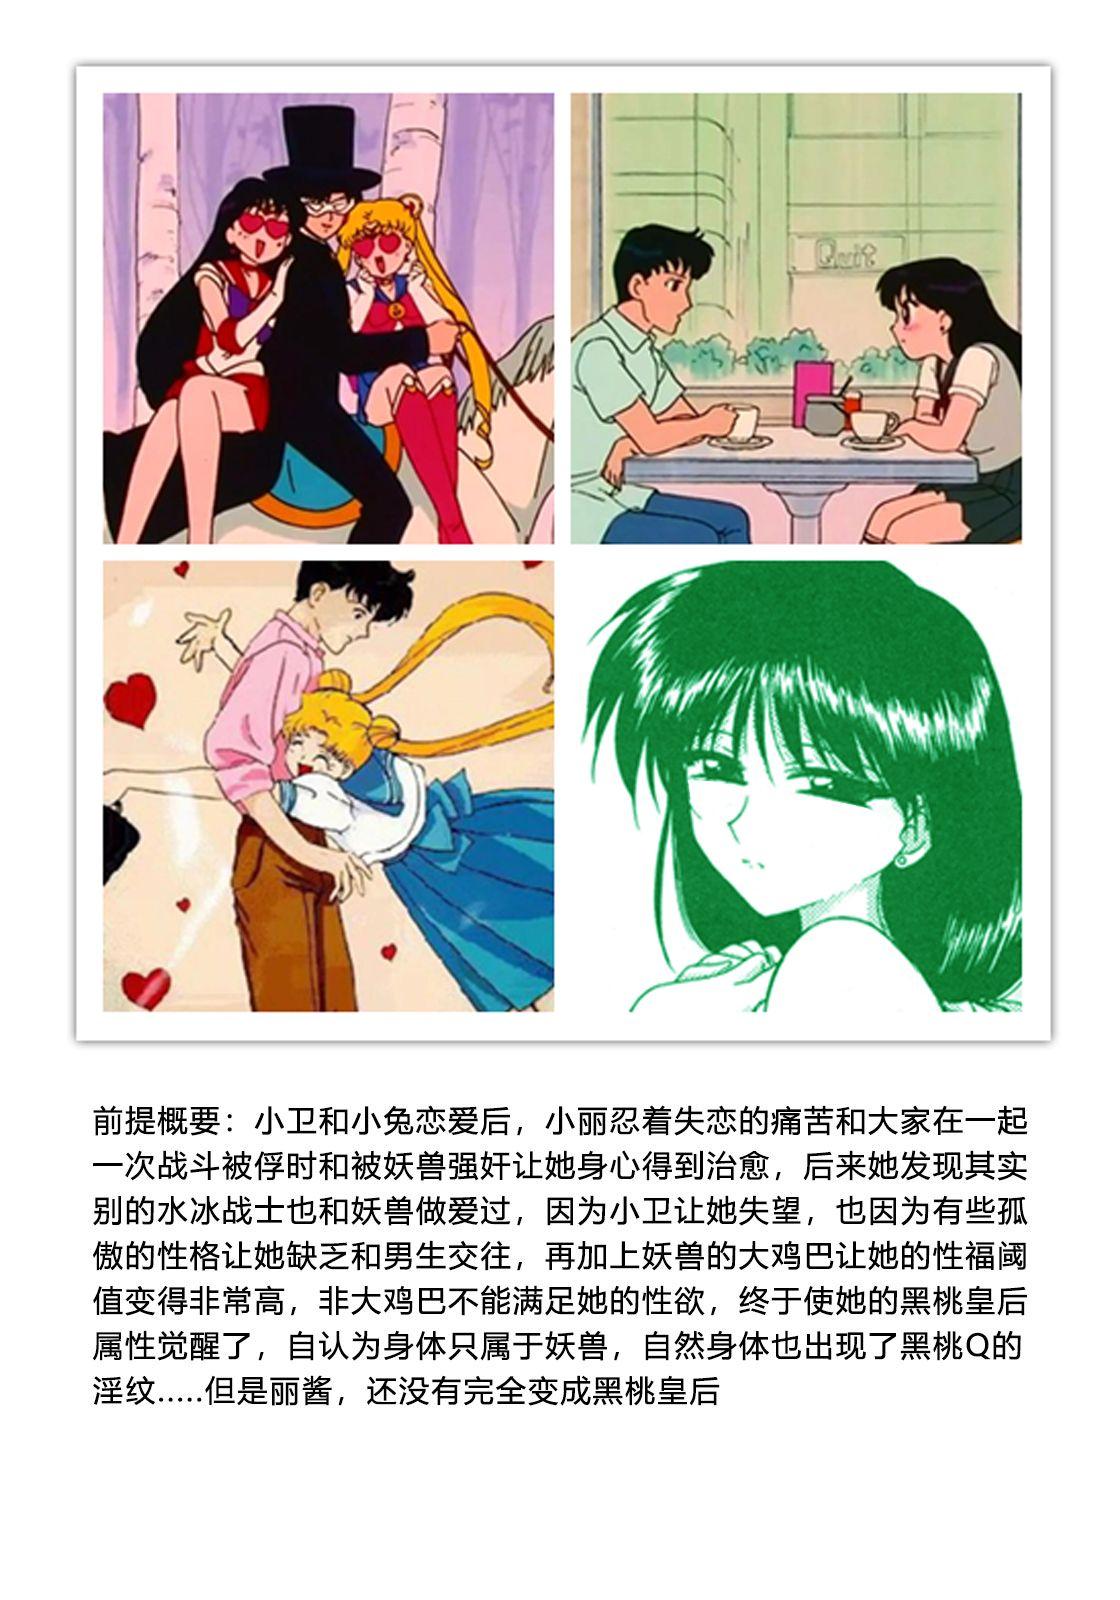 Fucking Hard QUEEN OF SPADES - 黑桃皇后 - Sailor moon Tight Ass - Page 12